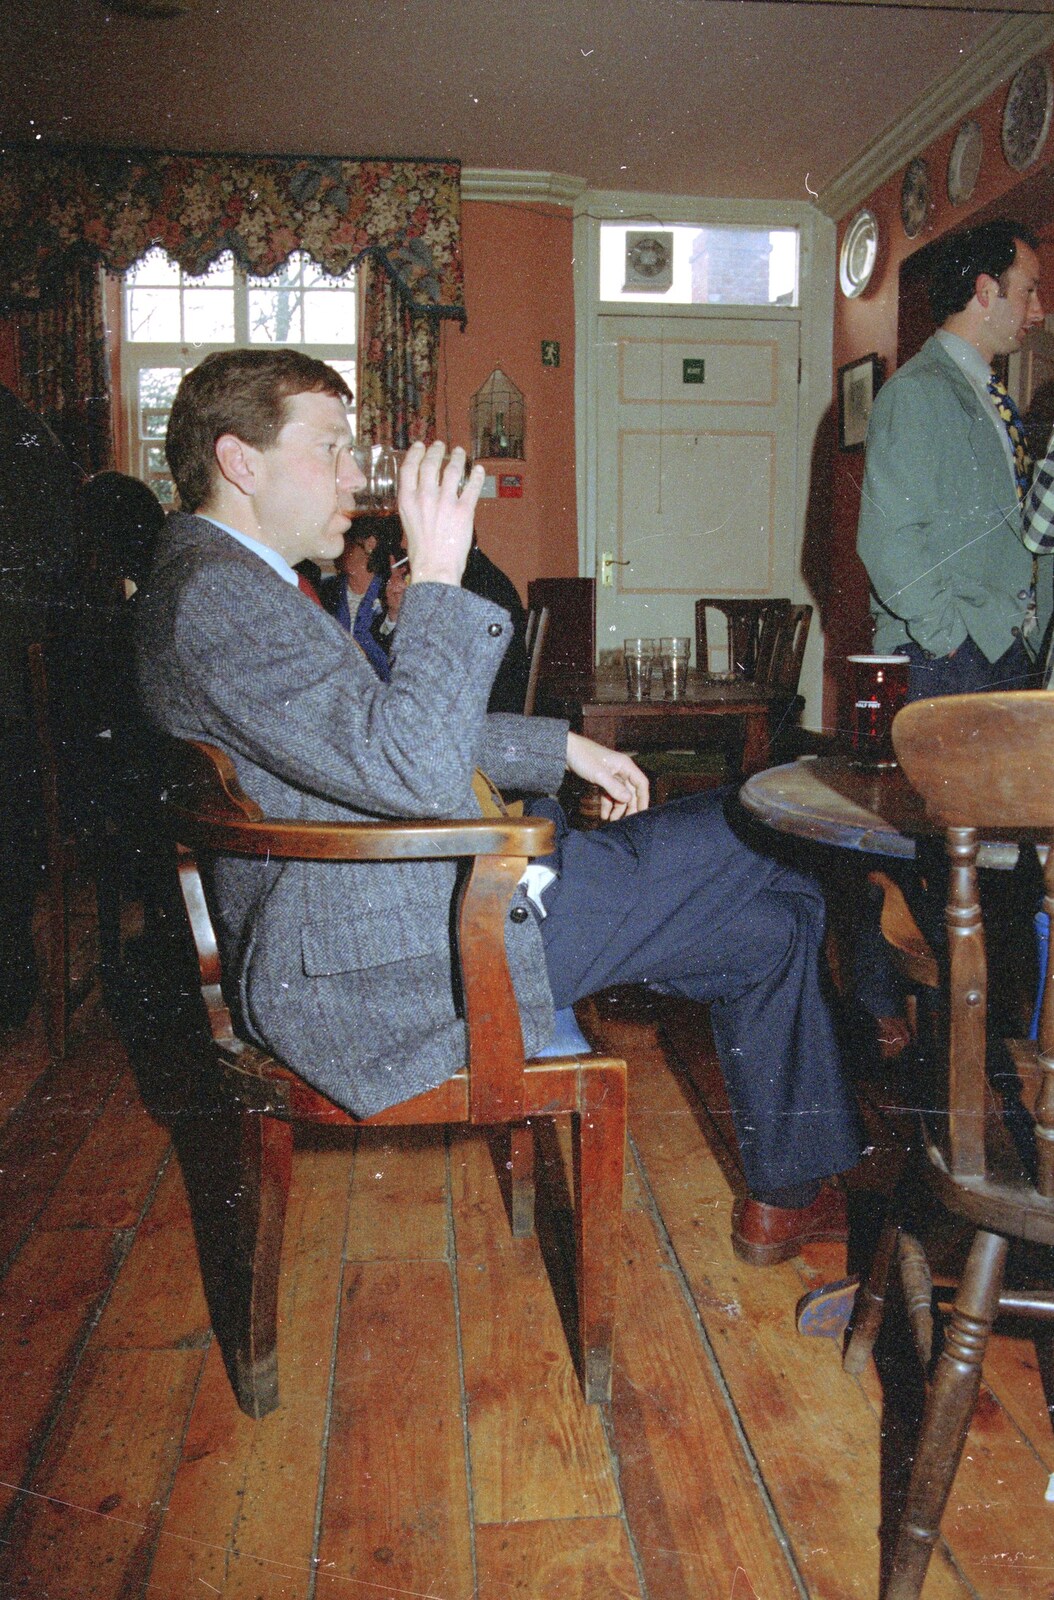 Apple slurps a beer from The Brome Swan at Graham and Pauline's Wedding, Gissing Hall, Norfolk - 28th April 1997